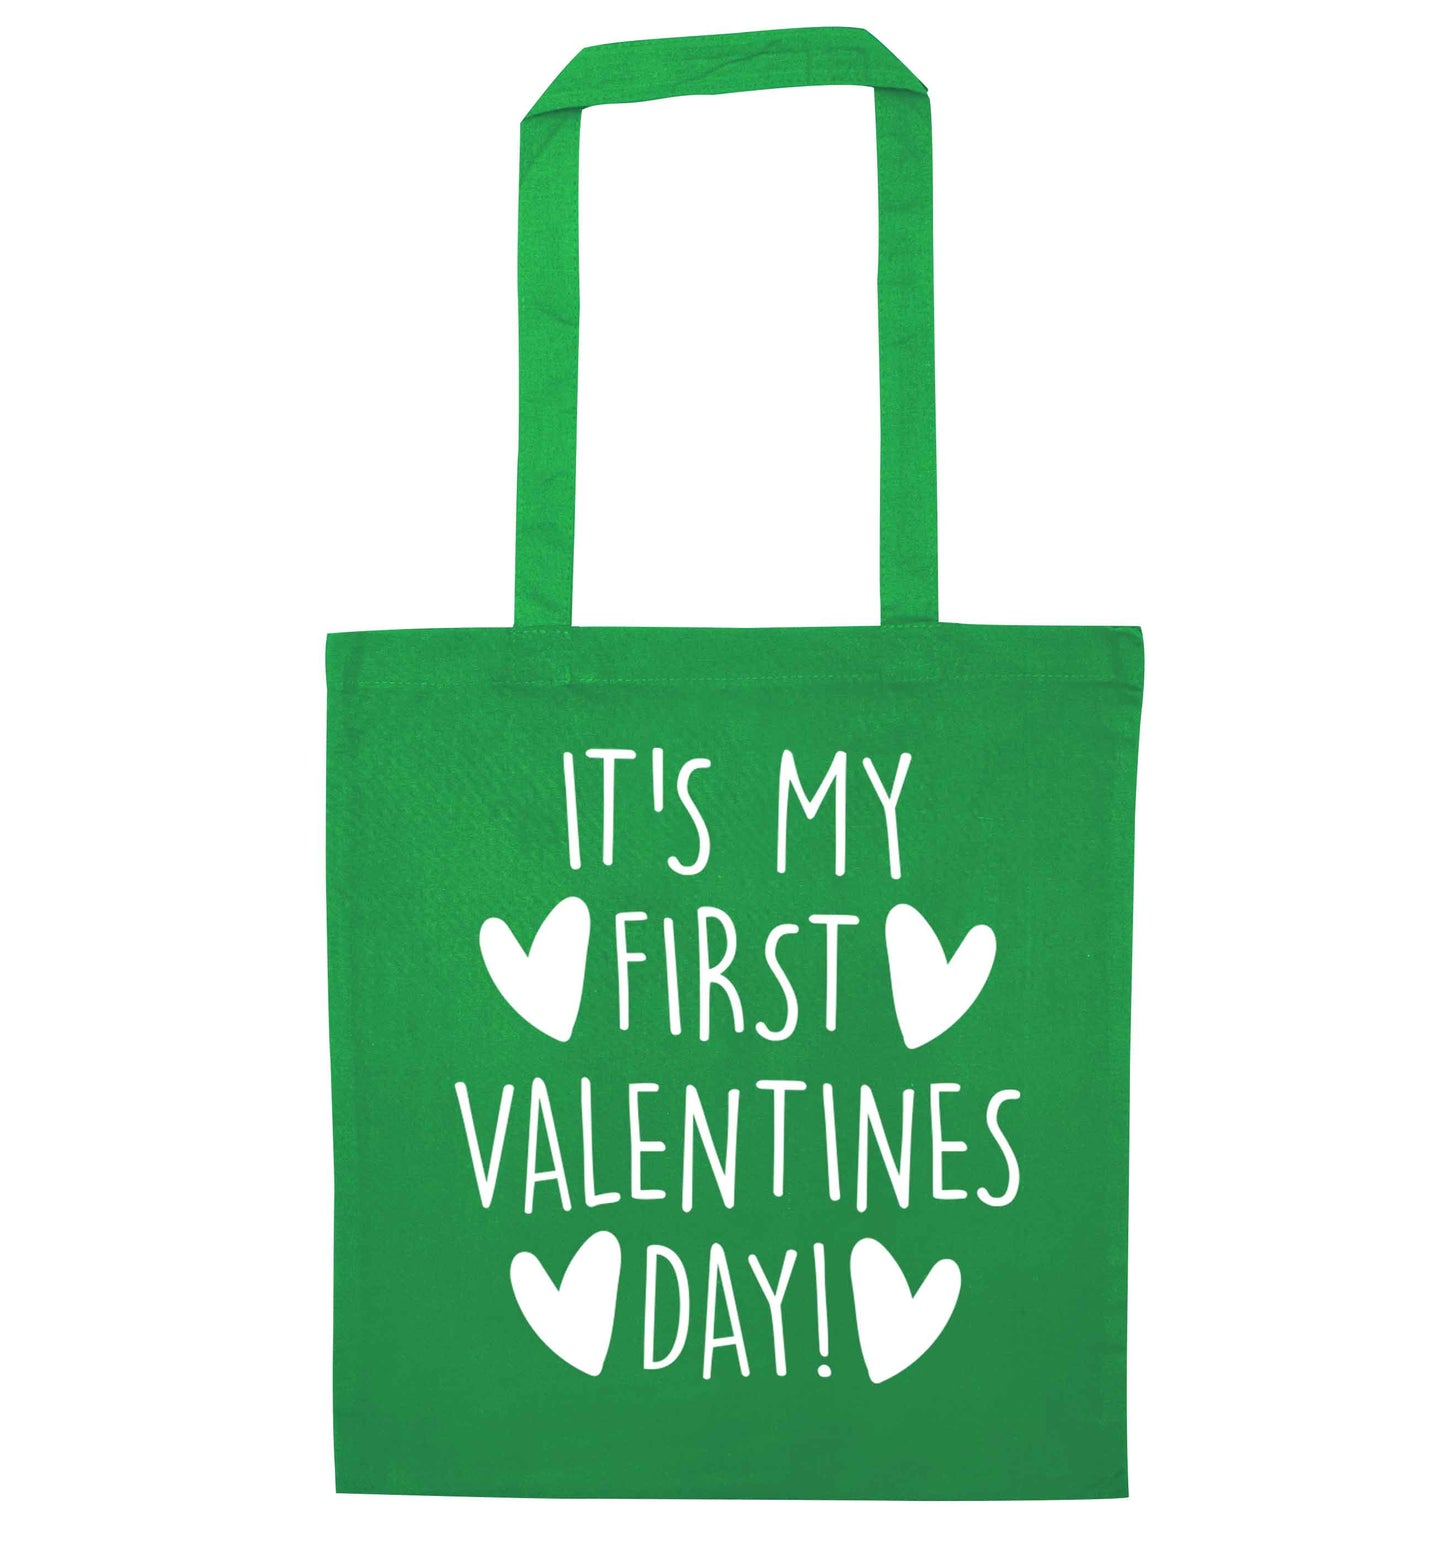 It's my first valentines day! green tote bag